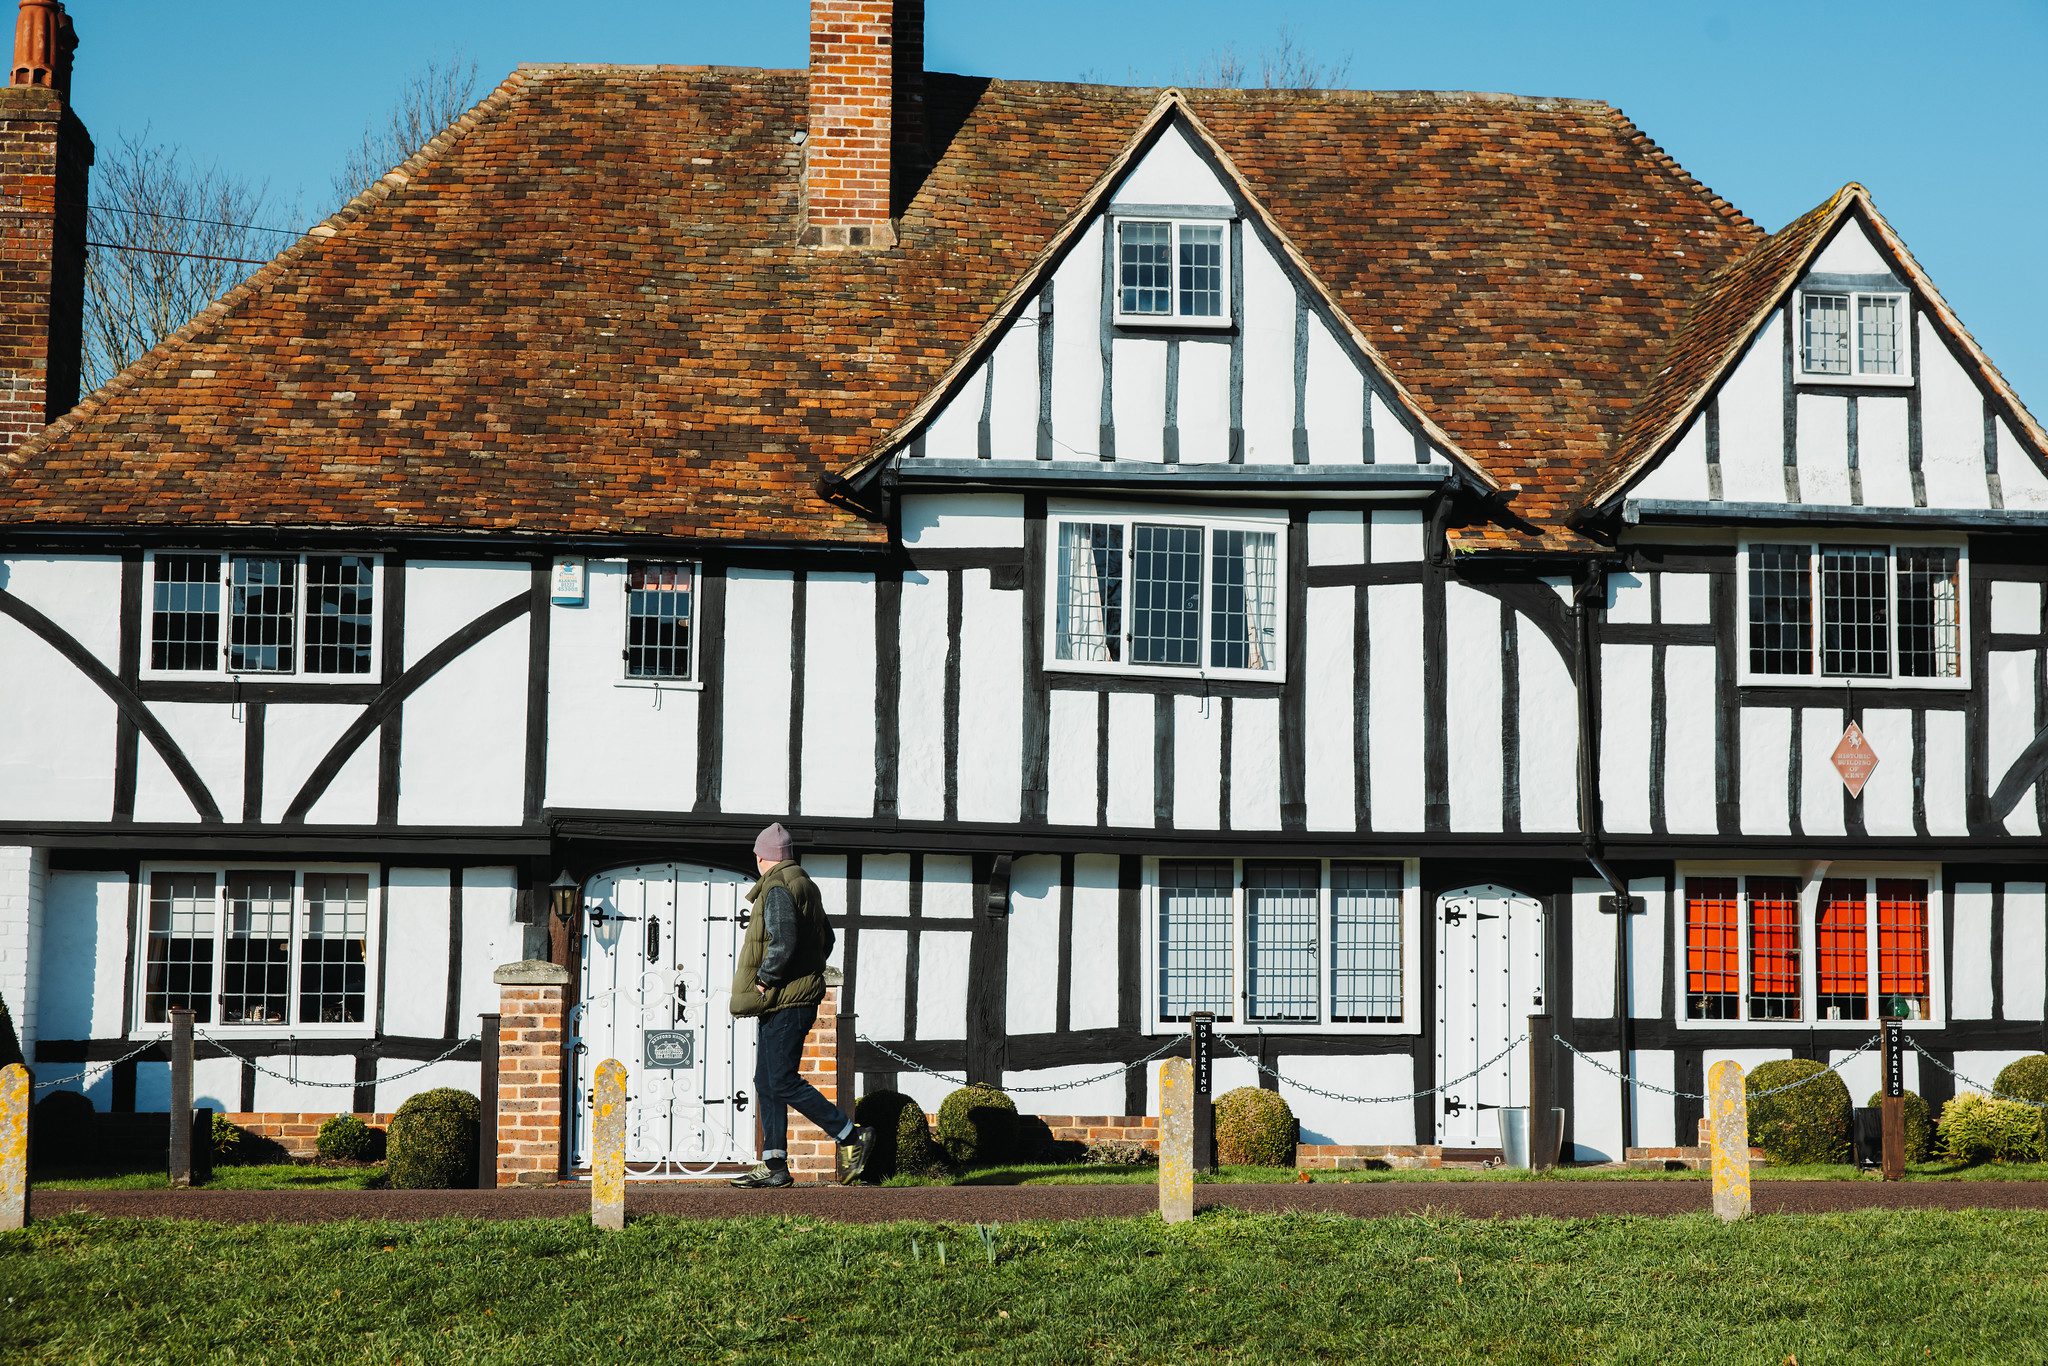 Man walking in front of tudor-style house